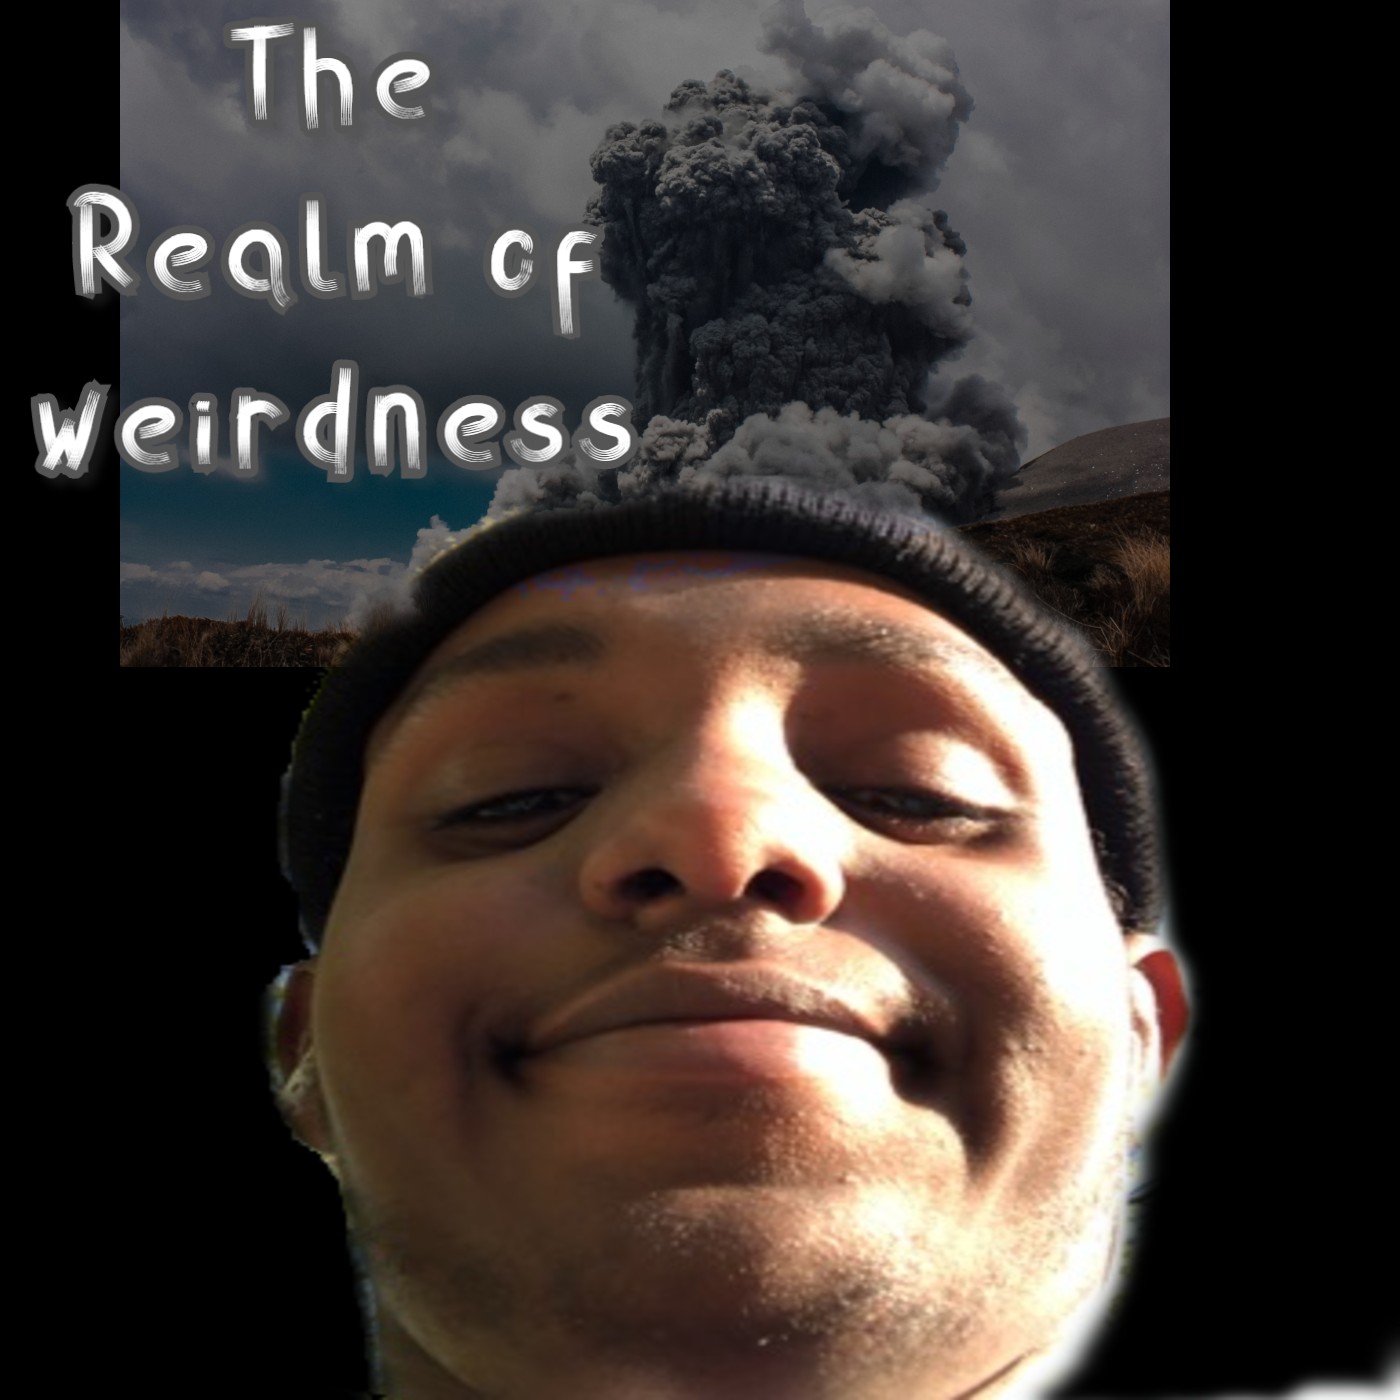 The Realm of weirdness : Episode 1